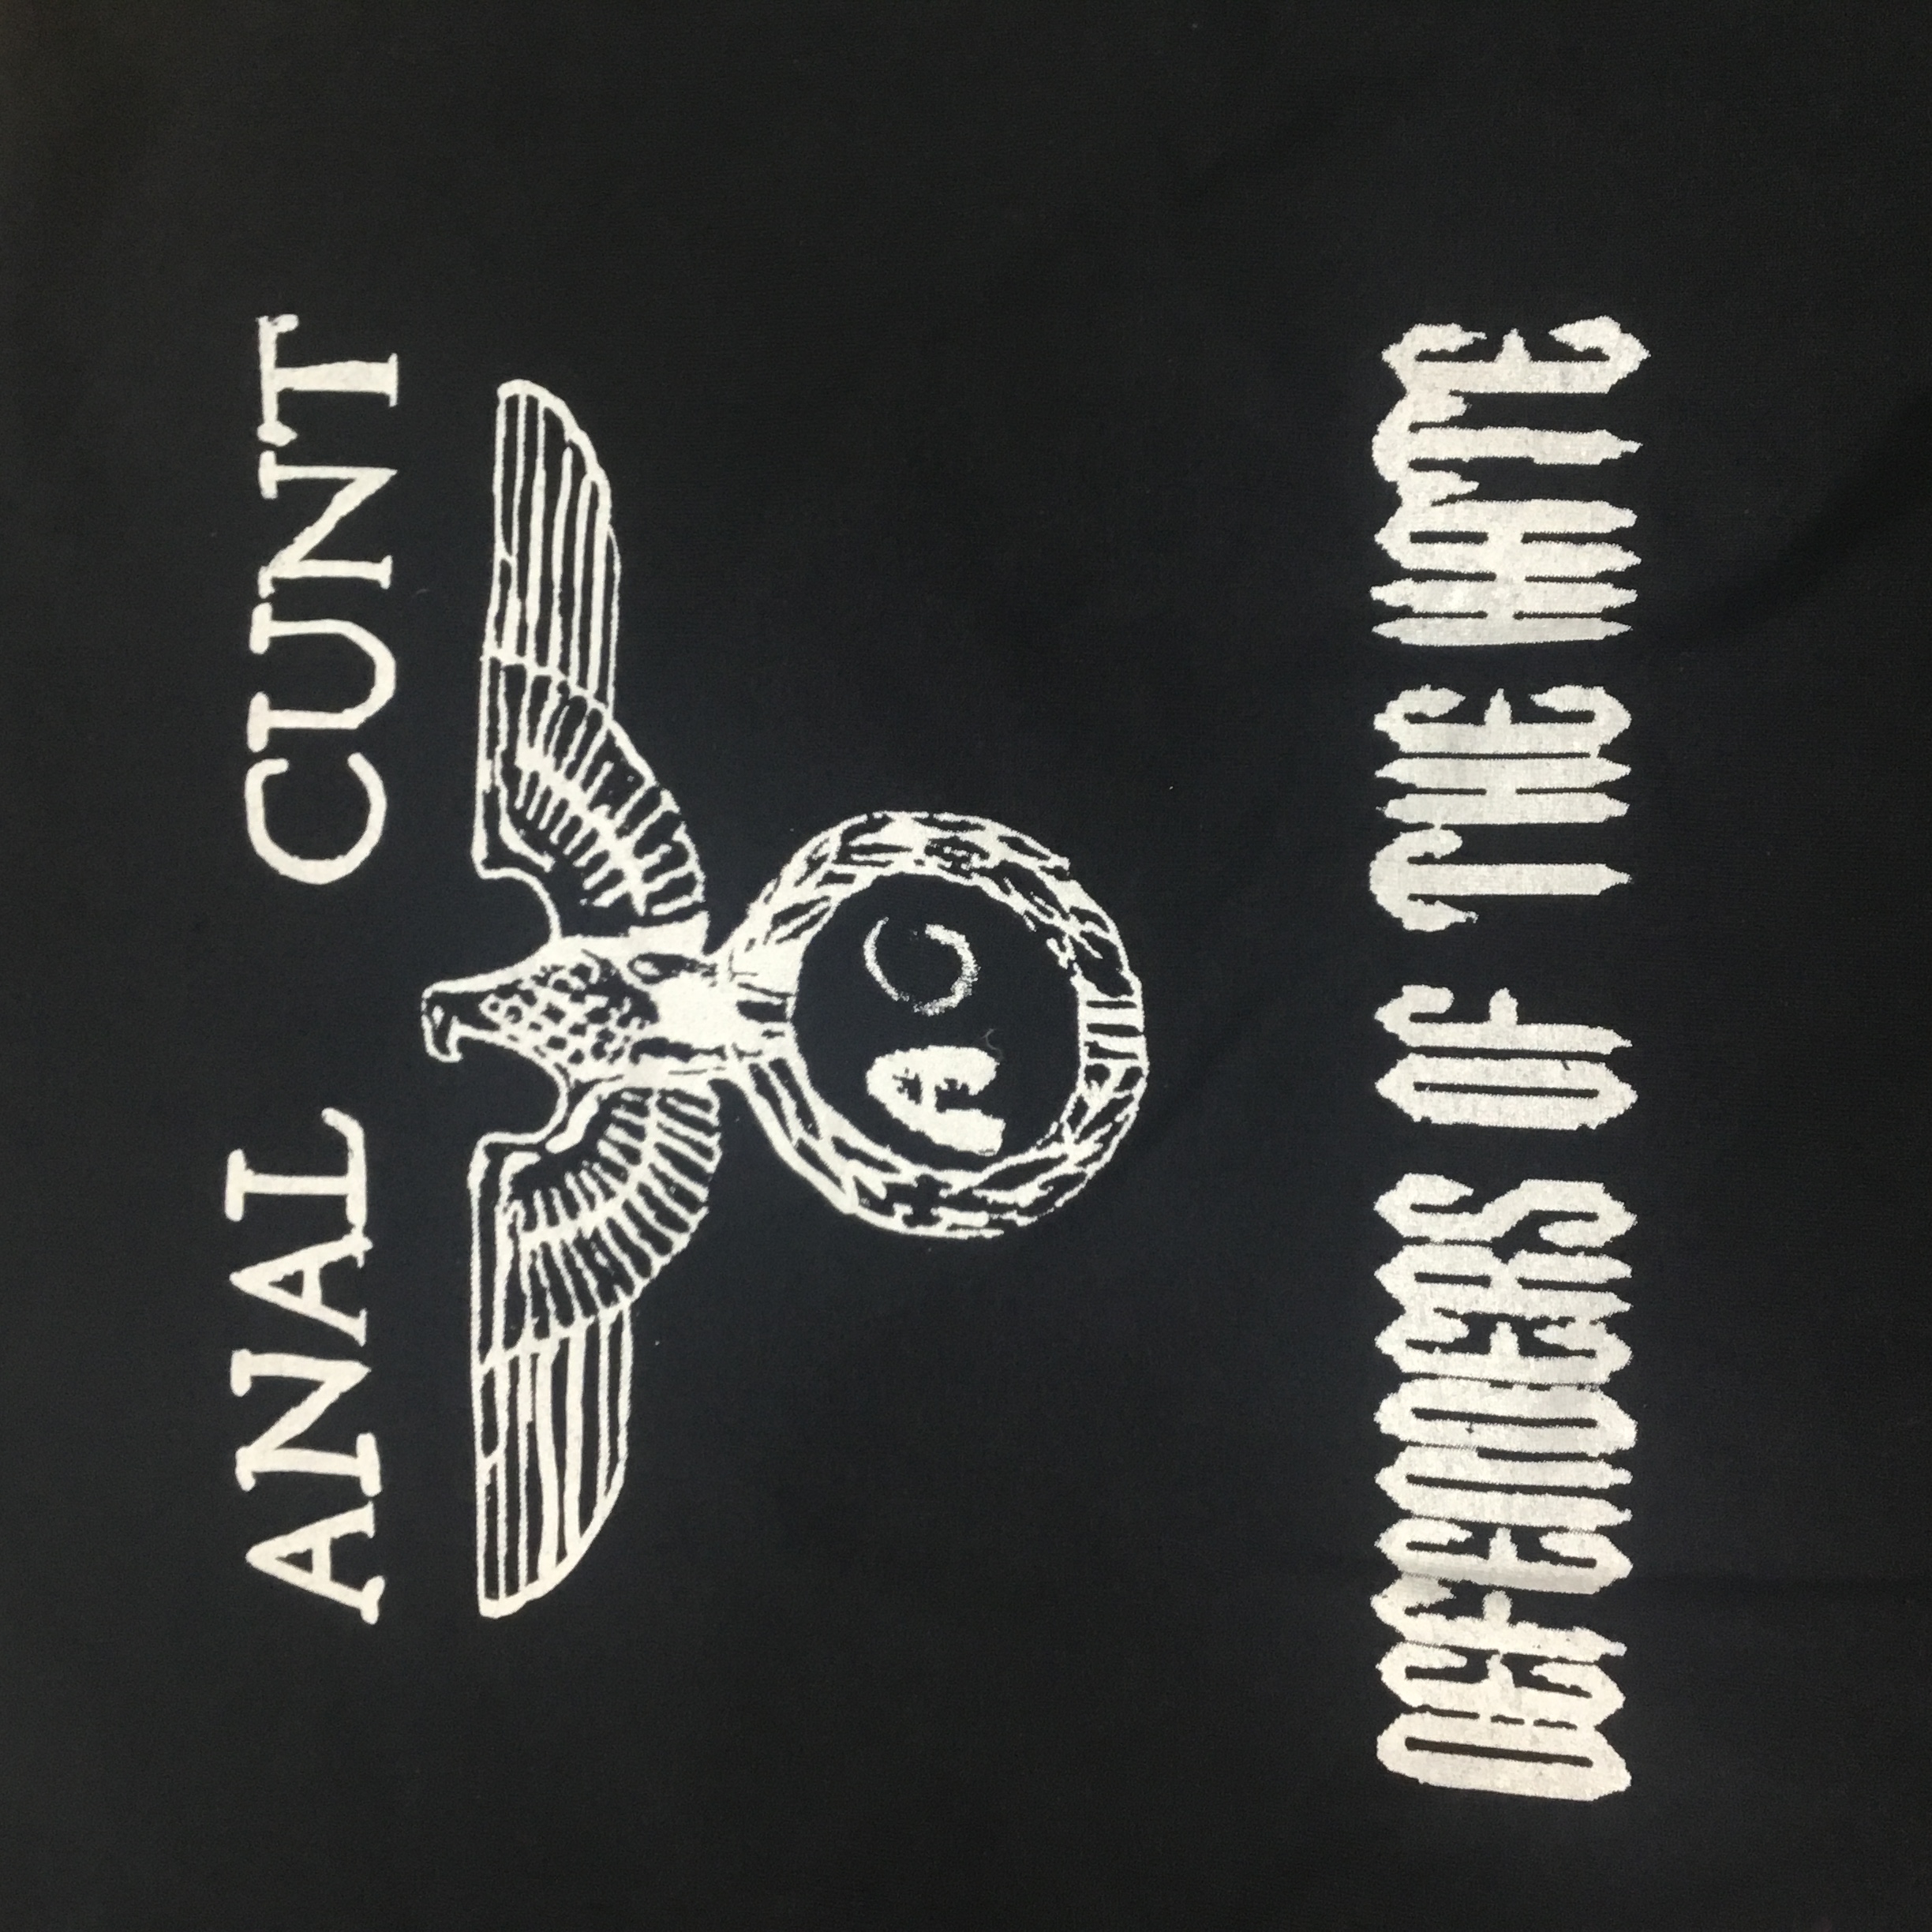 Anal Cunt - Defenders of the Hate - Shirt